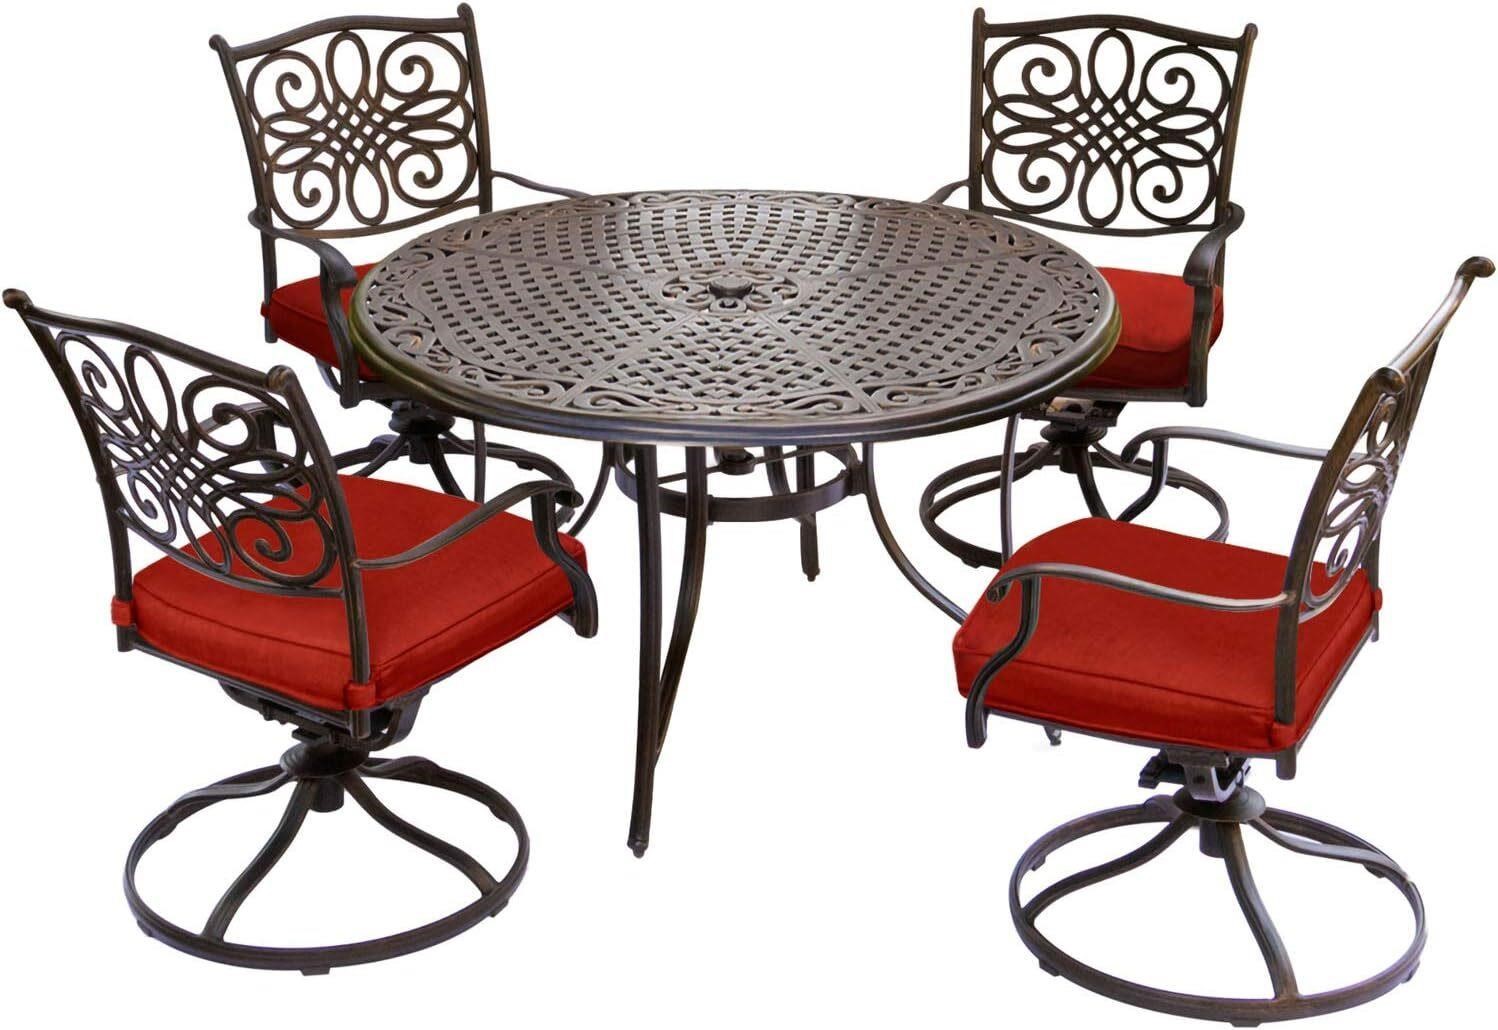 $1119  Hanover Traditions 5PC Patio Dining Set 48